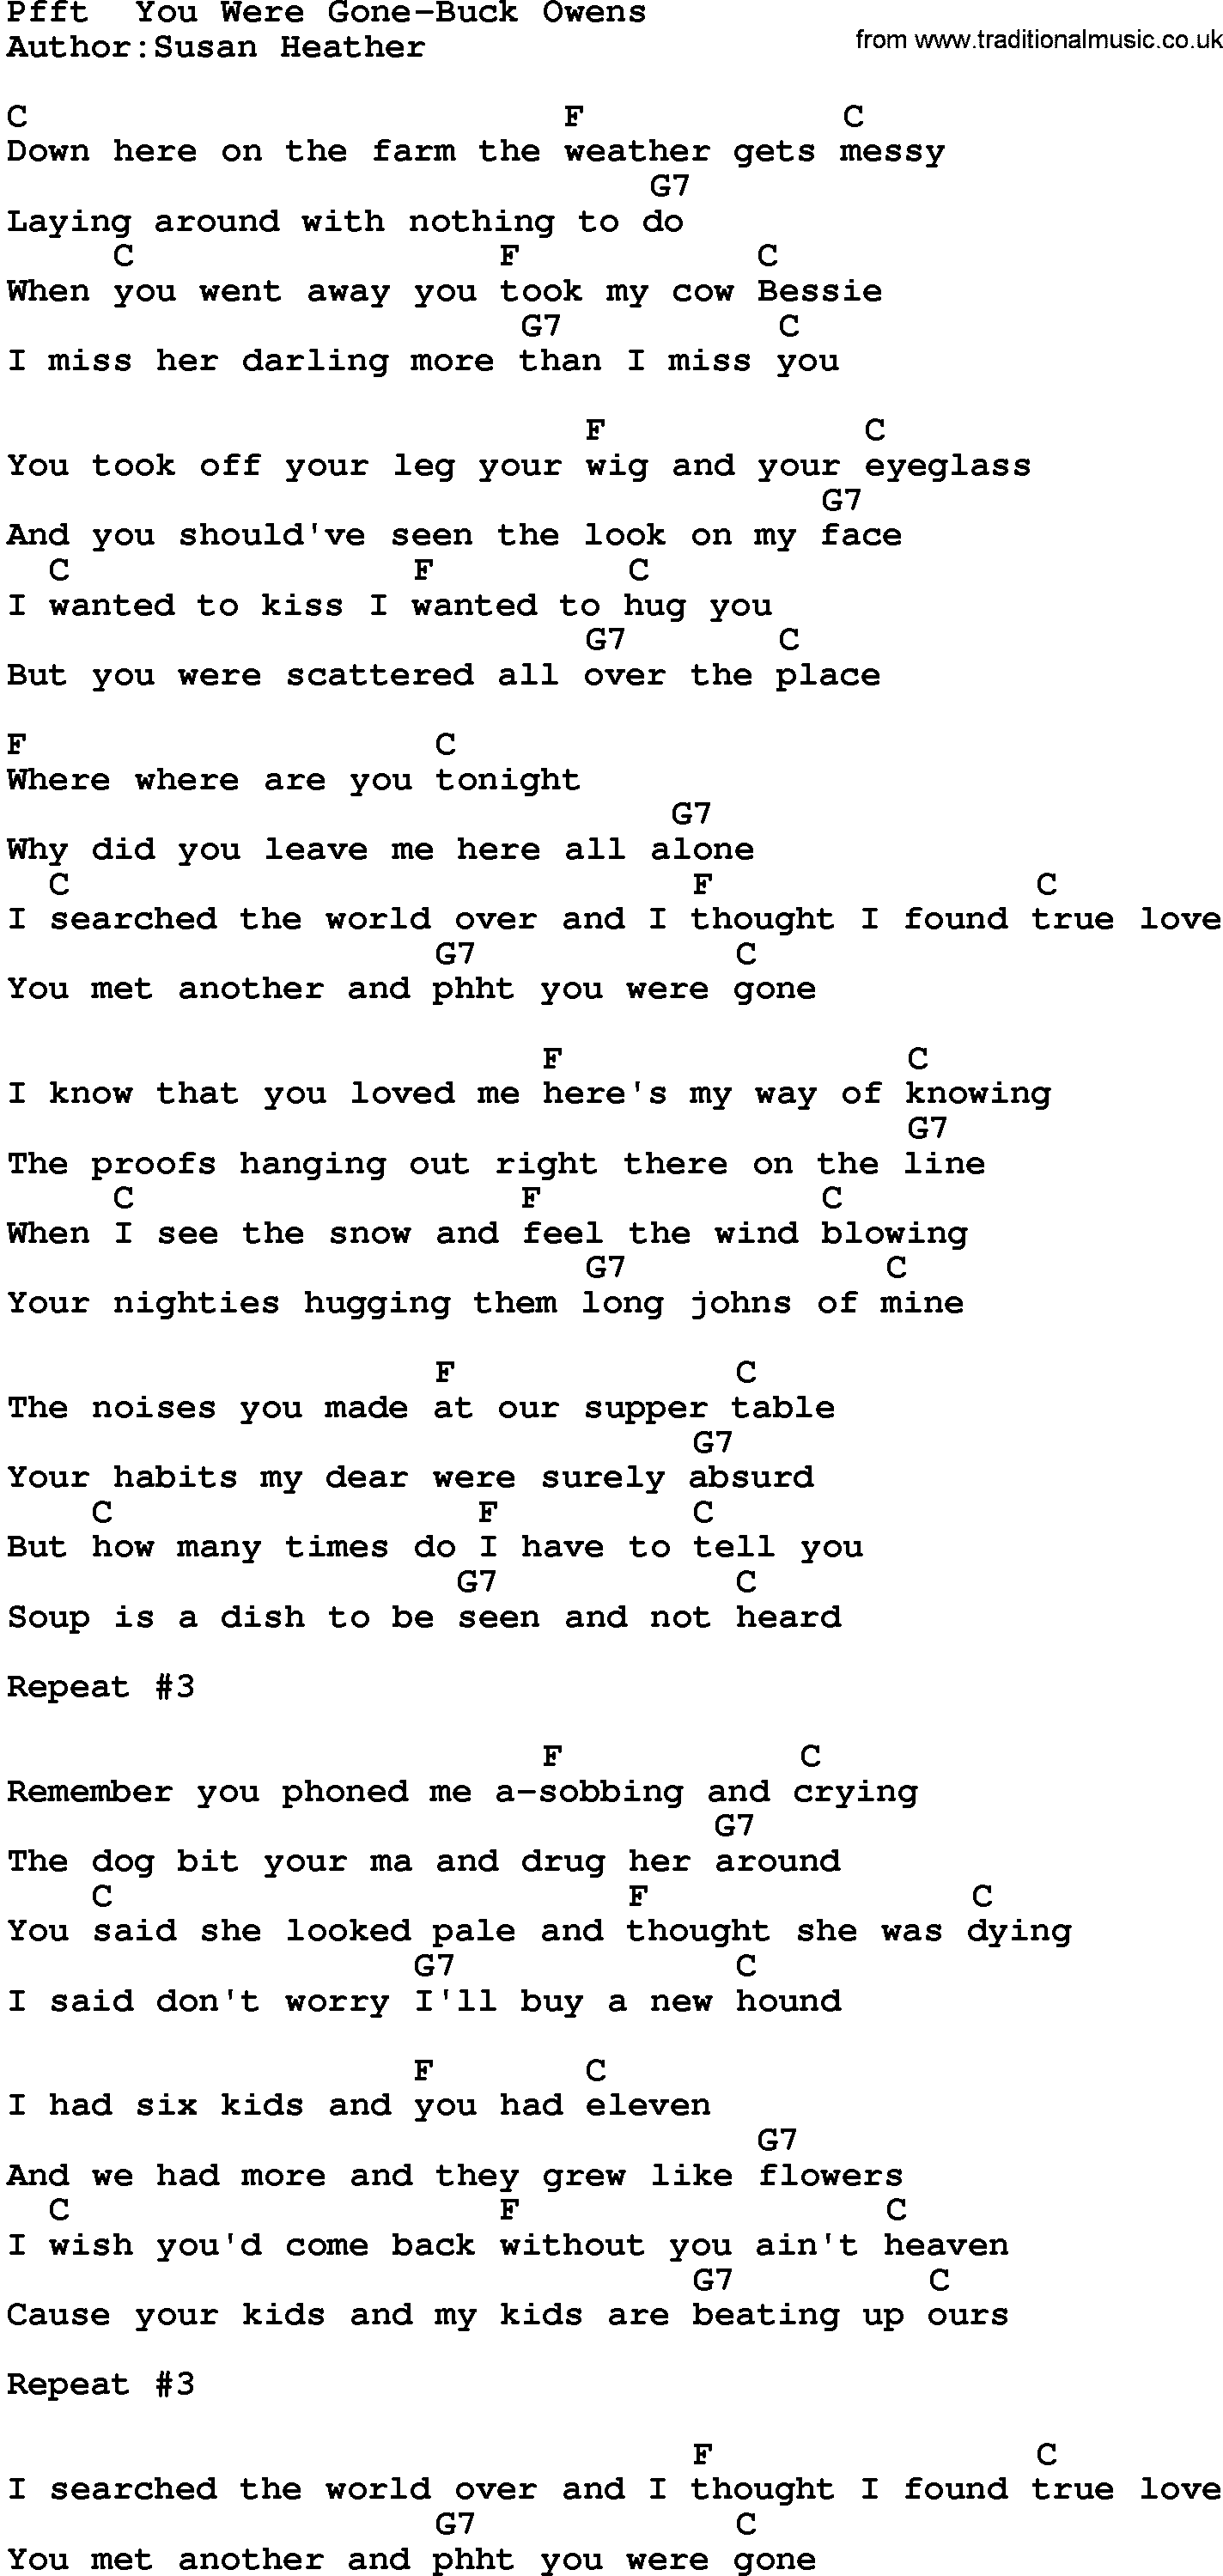 Country music song: Pfft You Were Gone-Buck Owens lyrics and chords